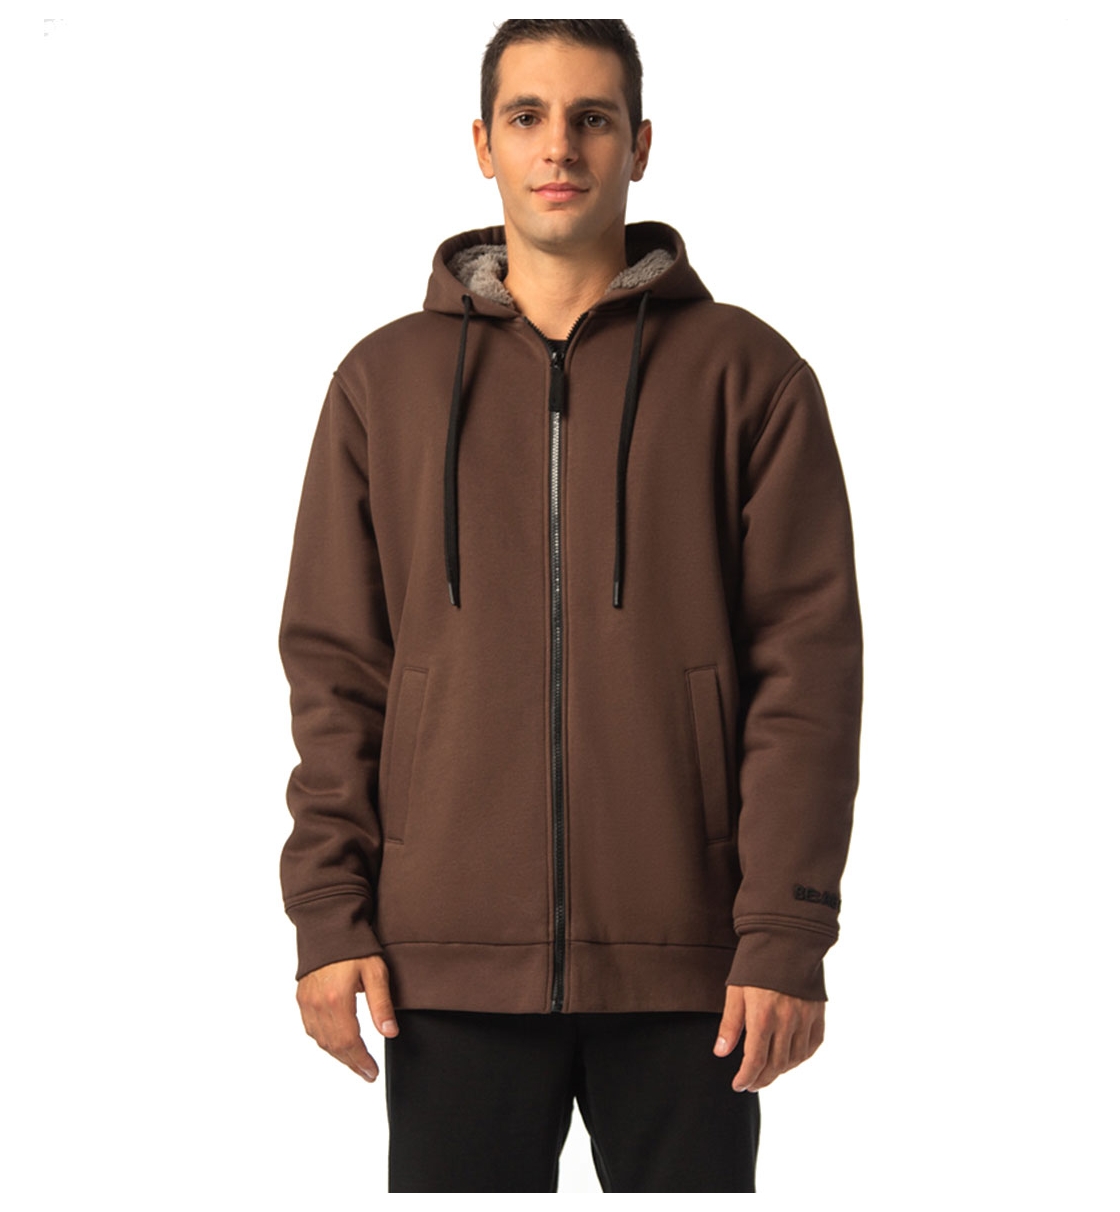 Be:Nation FW22 Ανδρική Ζακέτα Με Κουκούλα Full Zip Hood With Sherpa Lining 07302203